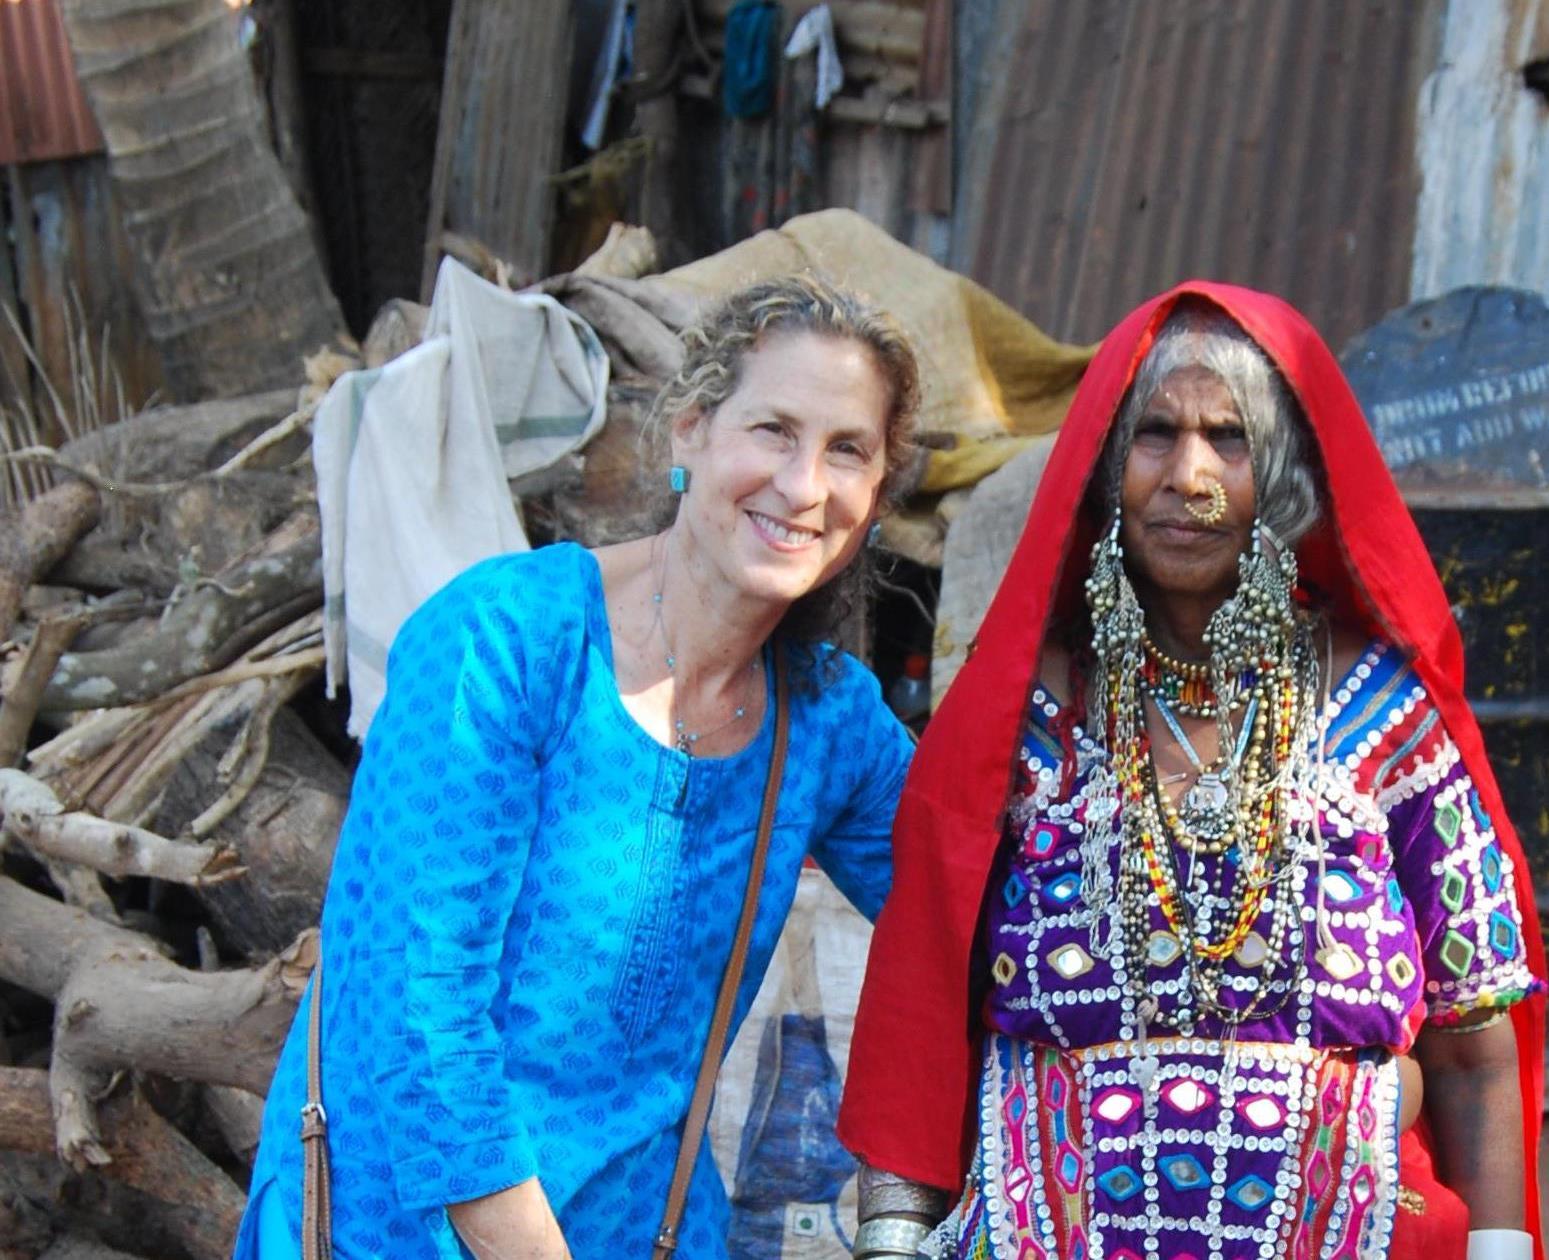 Dr. Donna Howard (left) poses with a village elder in India (right).